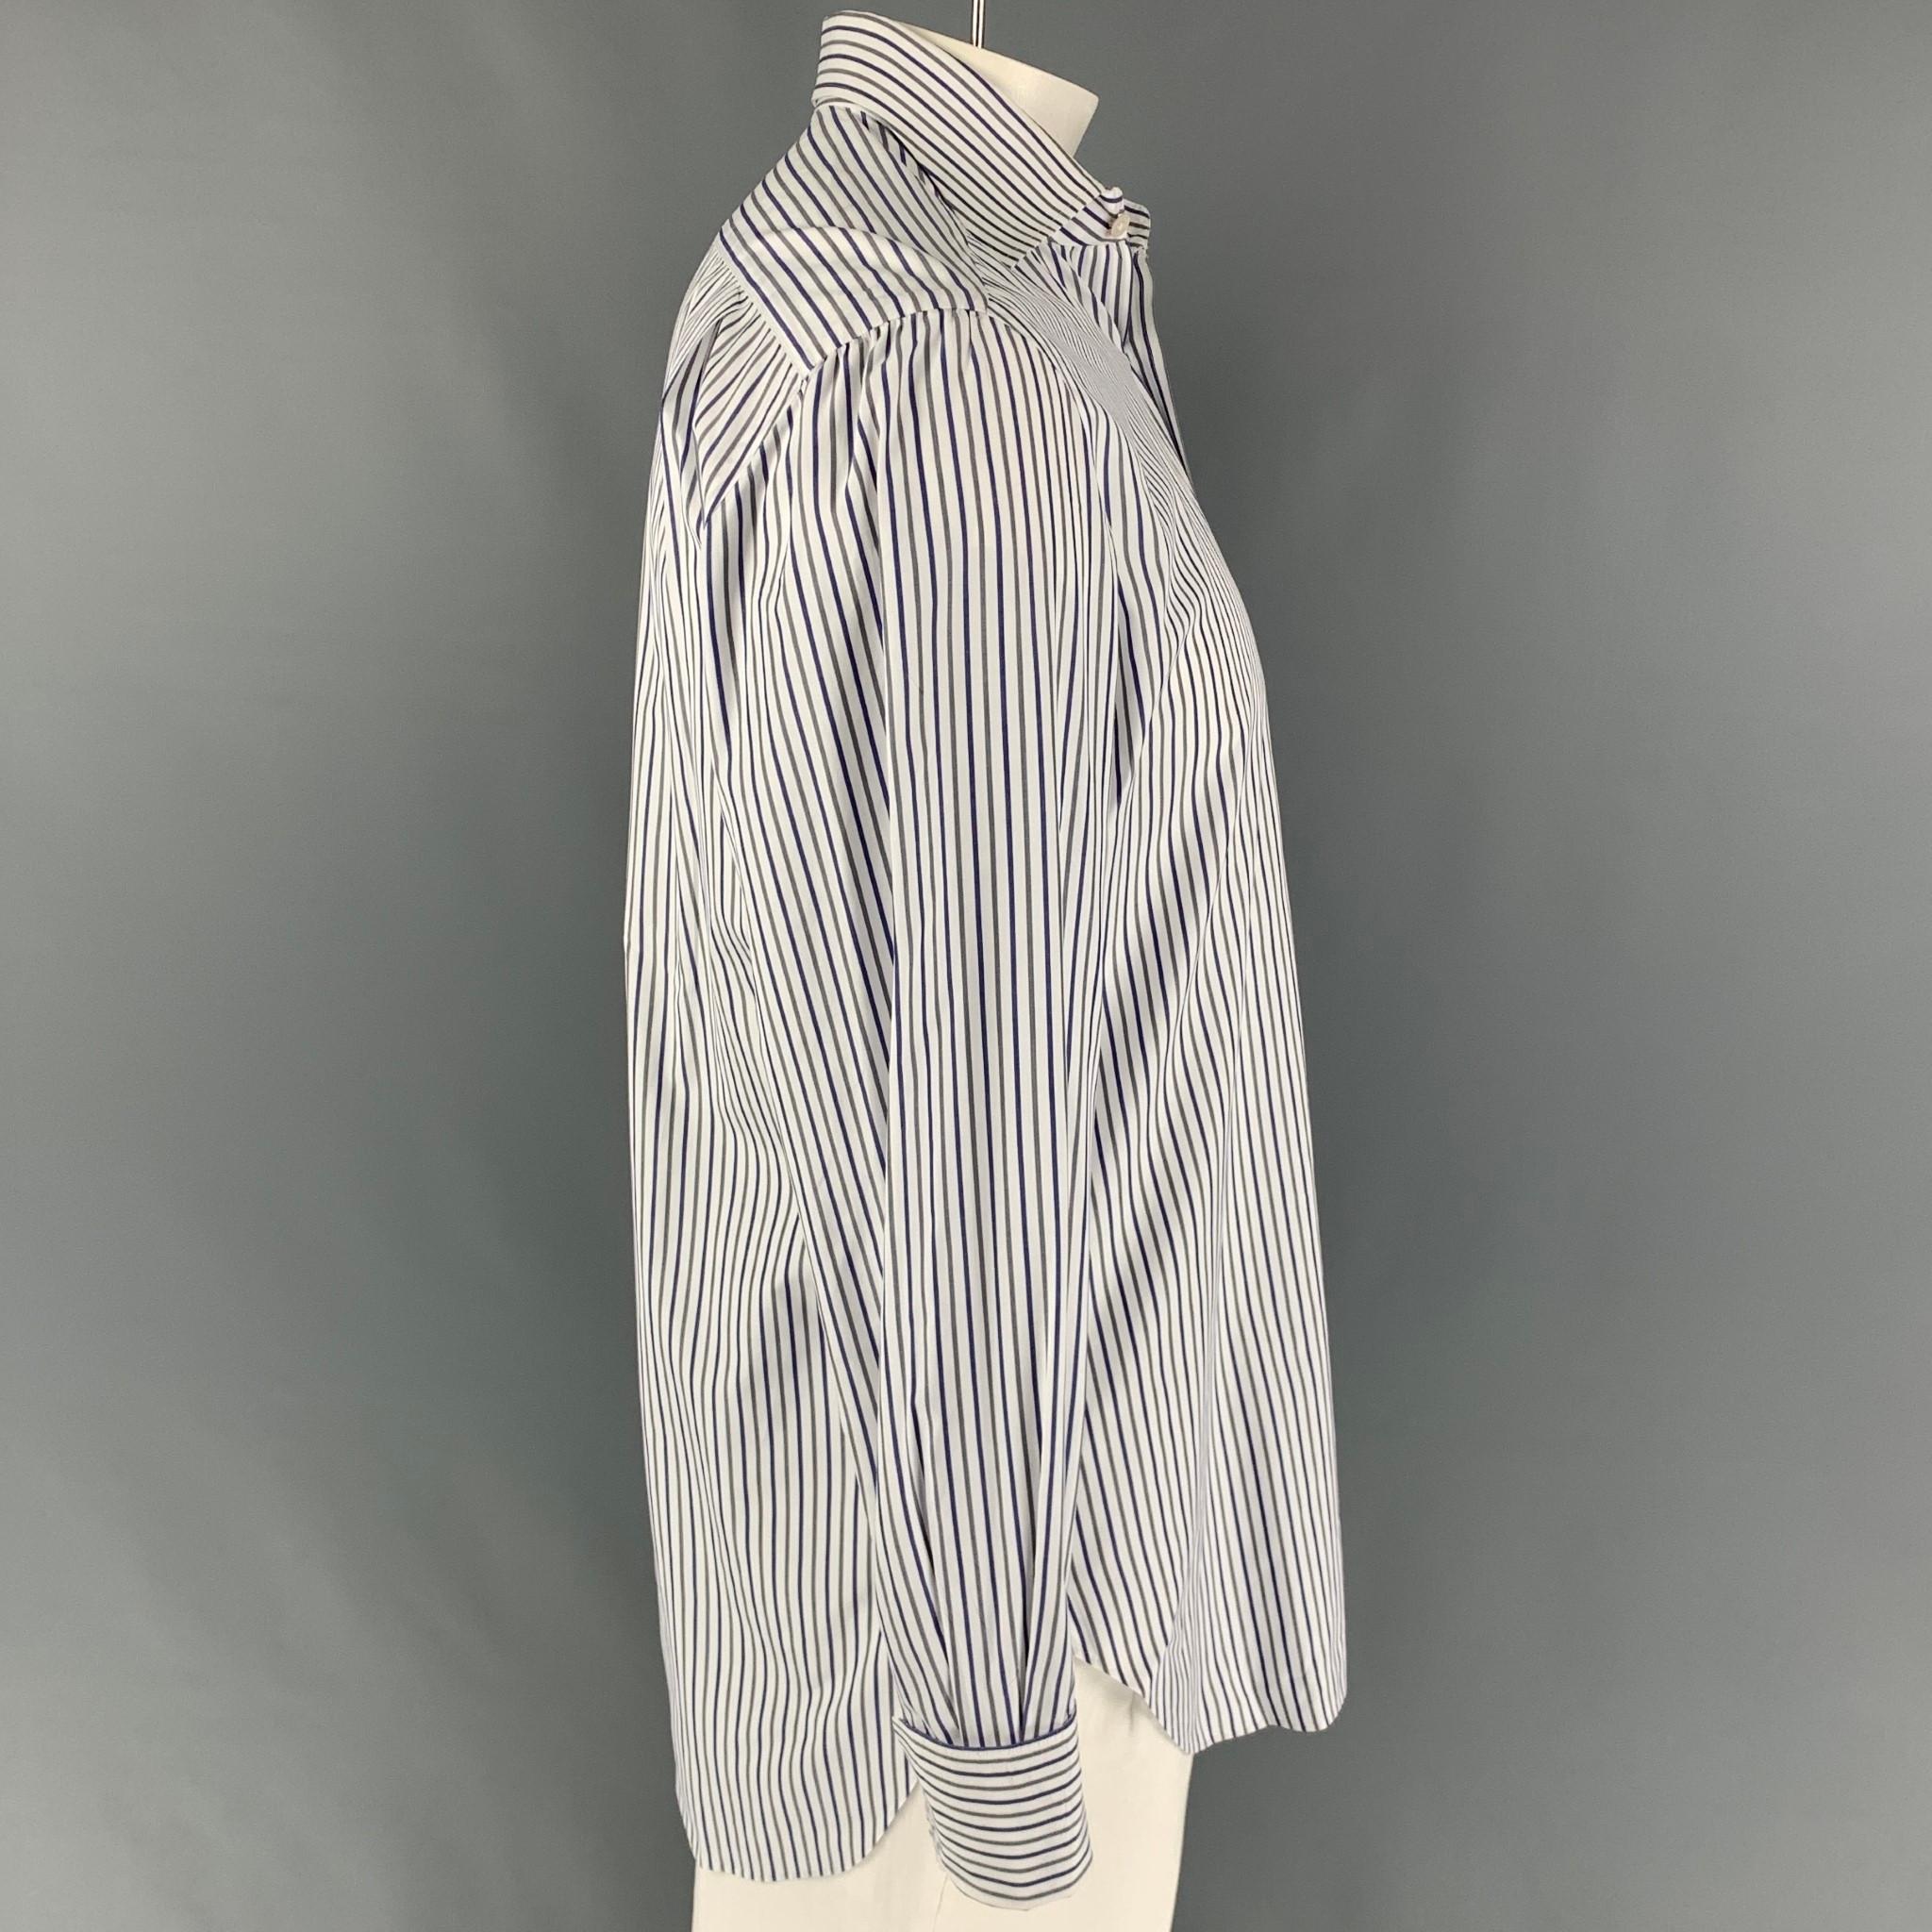 KITON long sleeve shirt comes in a white & blue stripe cotton featuring a spread collar, patch pocket, french cuffs, and a button up closure. Cufflinks not included. Made in Italy. 

Very Good Pre-Owned Condition.
Marked: